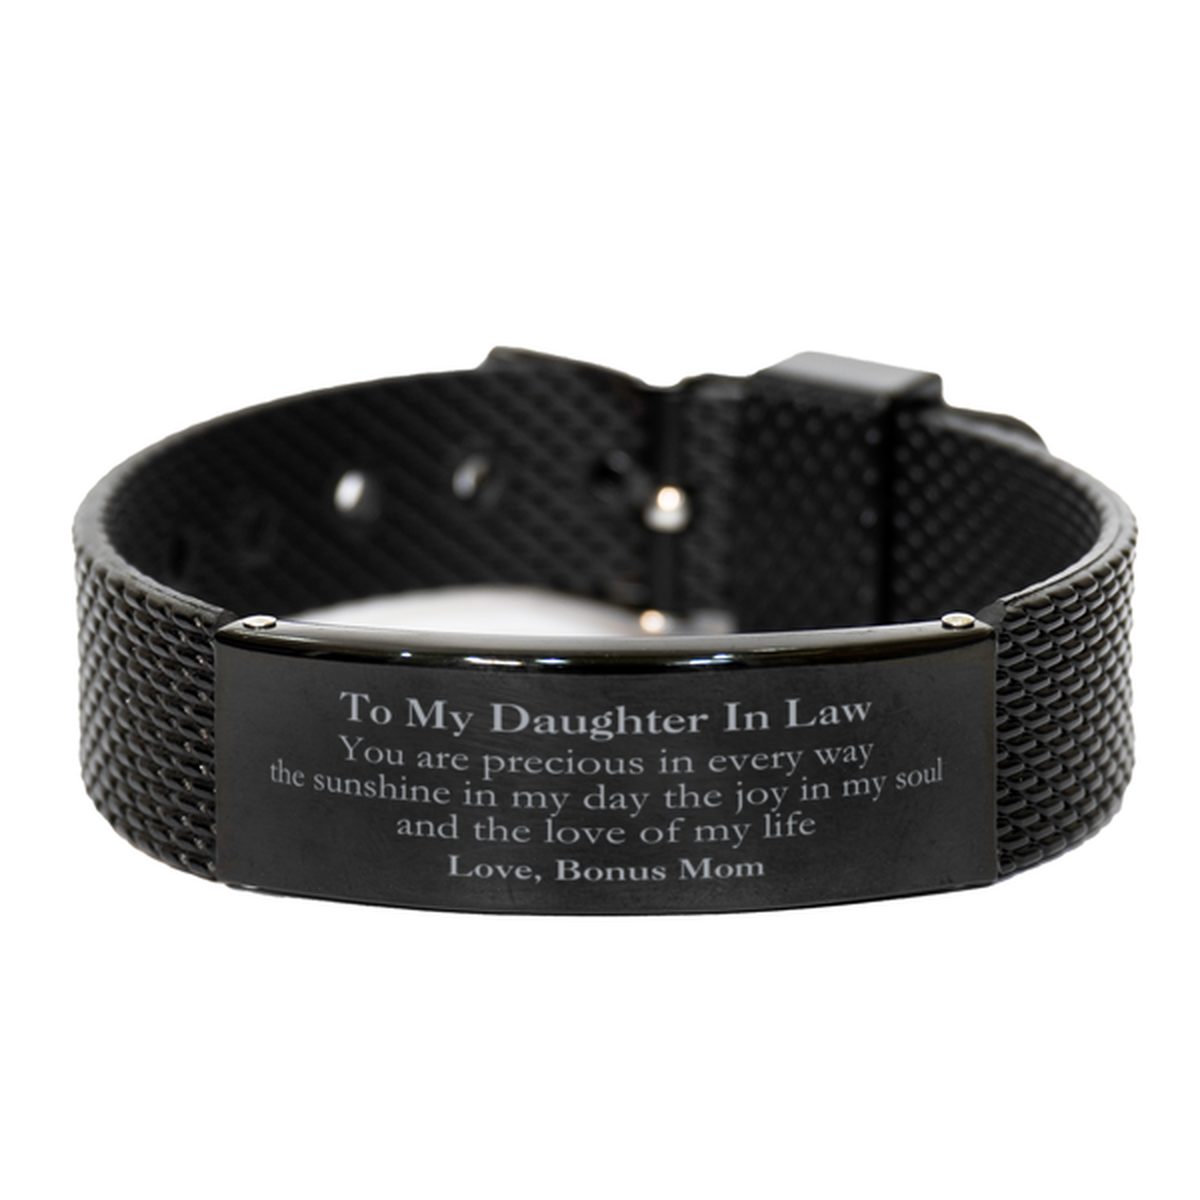 Graduation Gifts for Daughter In Law Black Shark Mesh Bracelet Present from Bonus Mom, Christmas Daughter In Law Birthday Gifts Daughter In Law You are precious in every way the sunshine in my day. Love, Bonus Mom